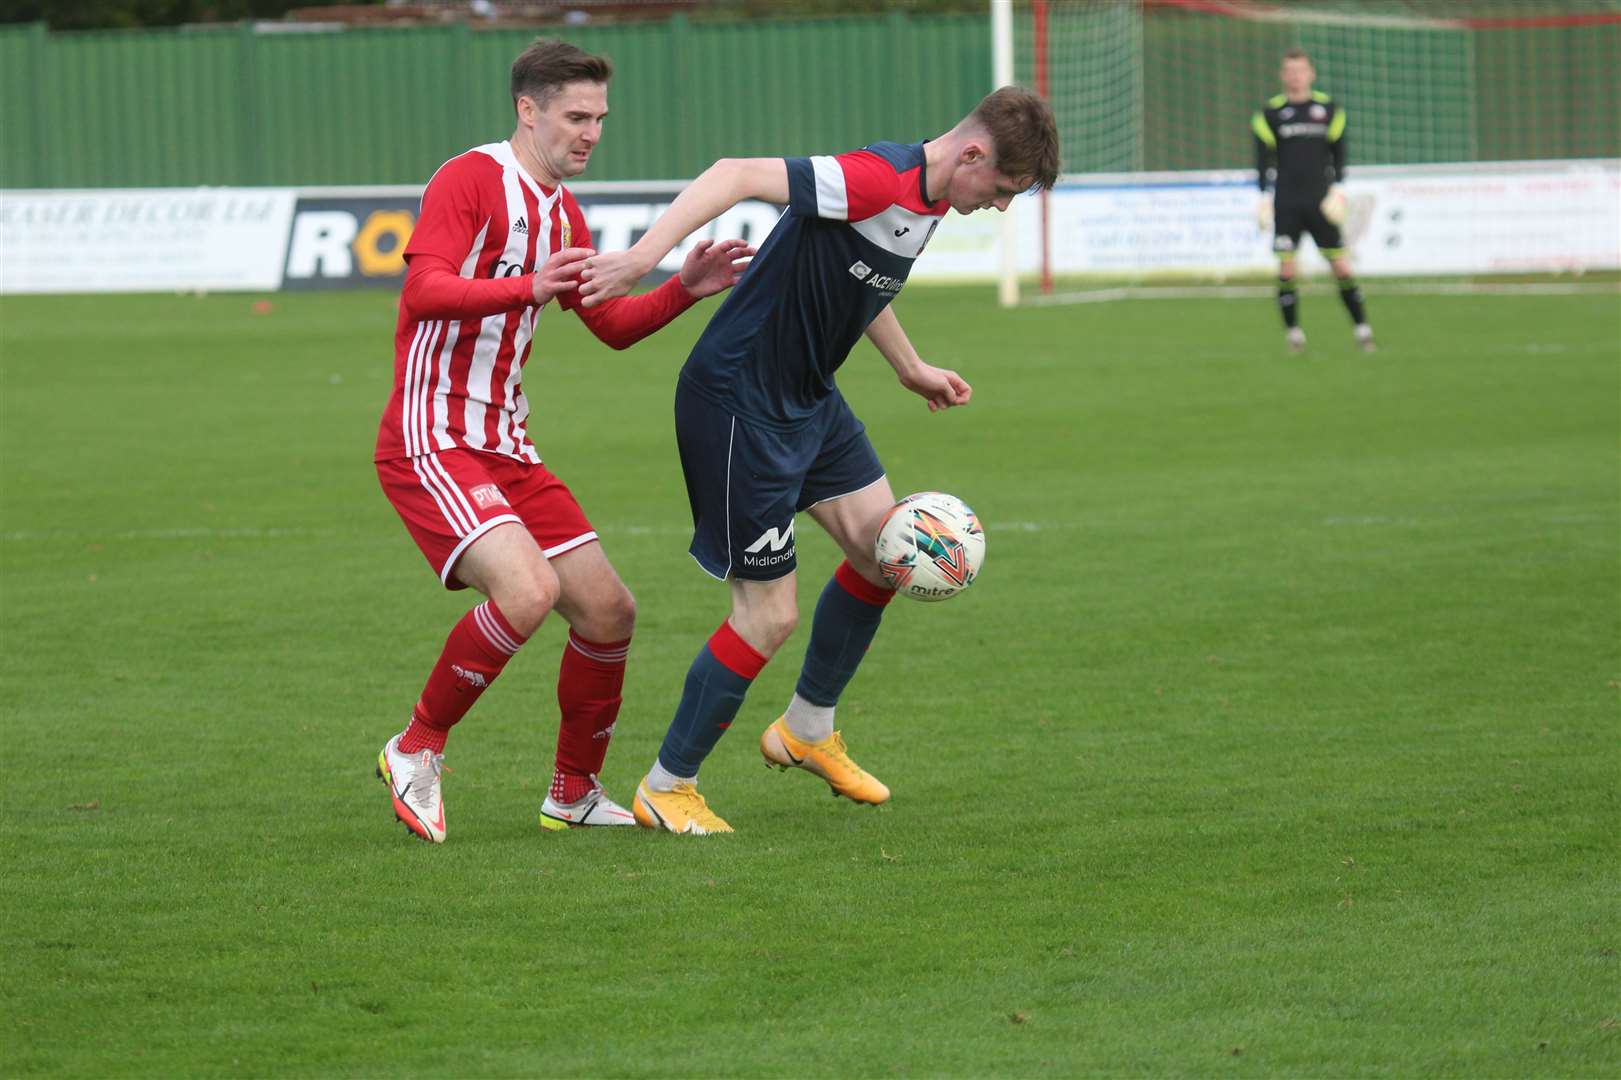 Formartine United v Turriff United. Picture: Kyle Ritchie